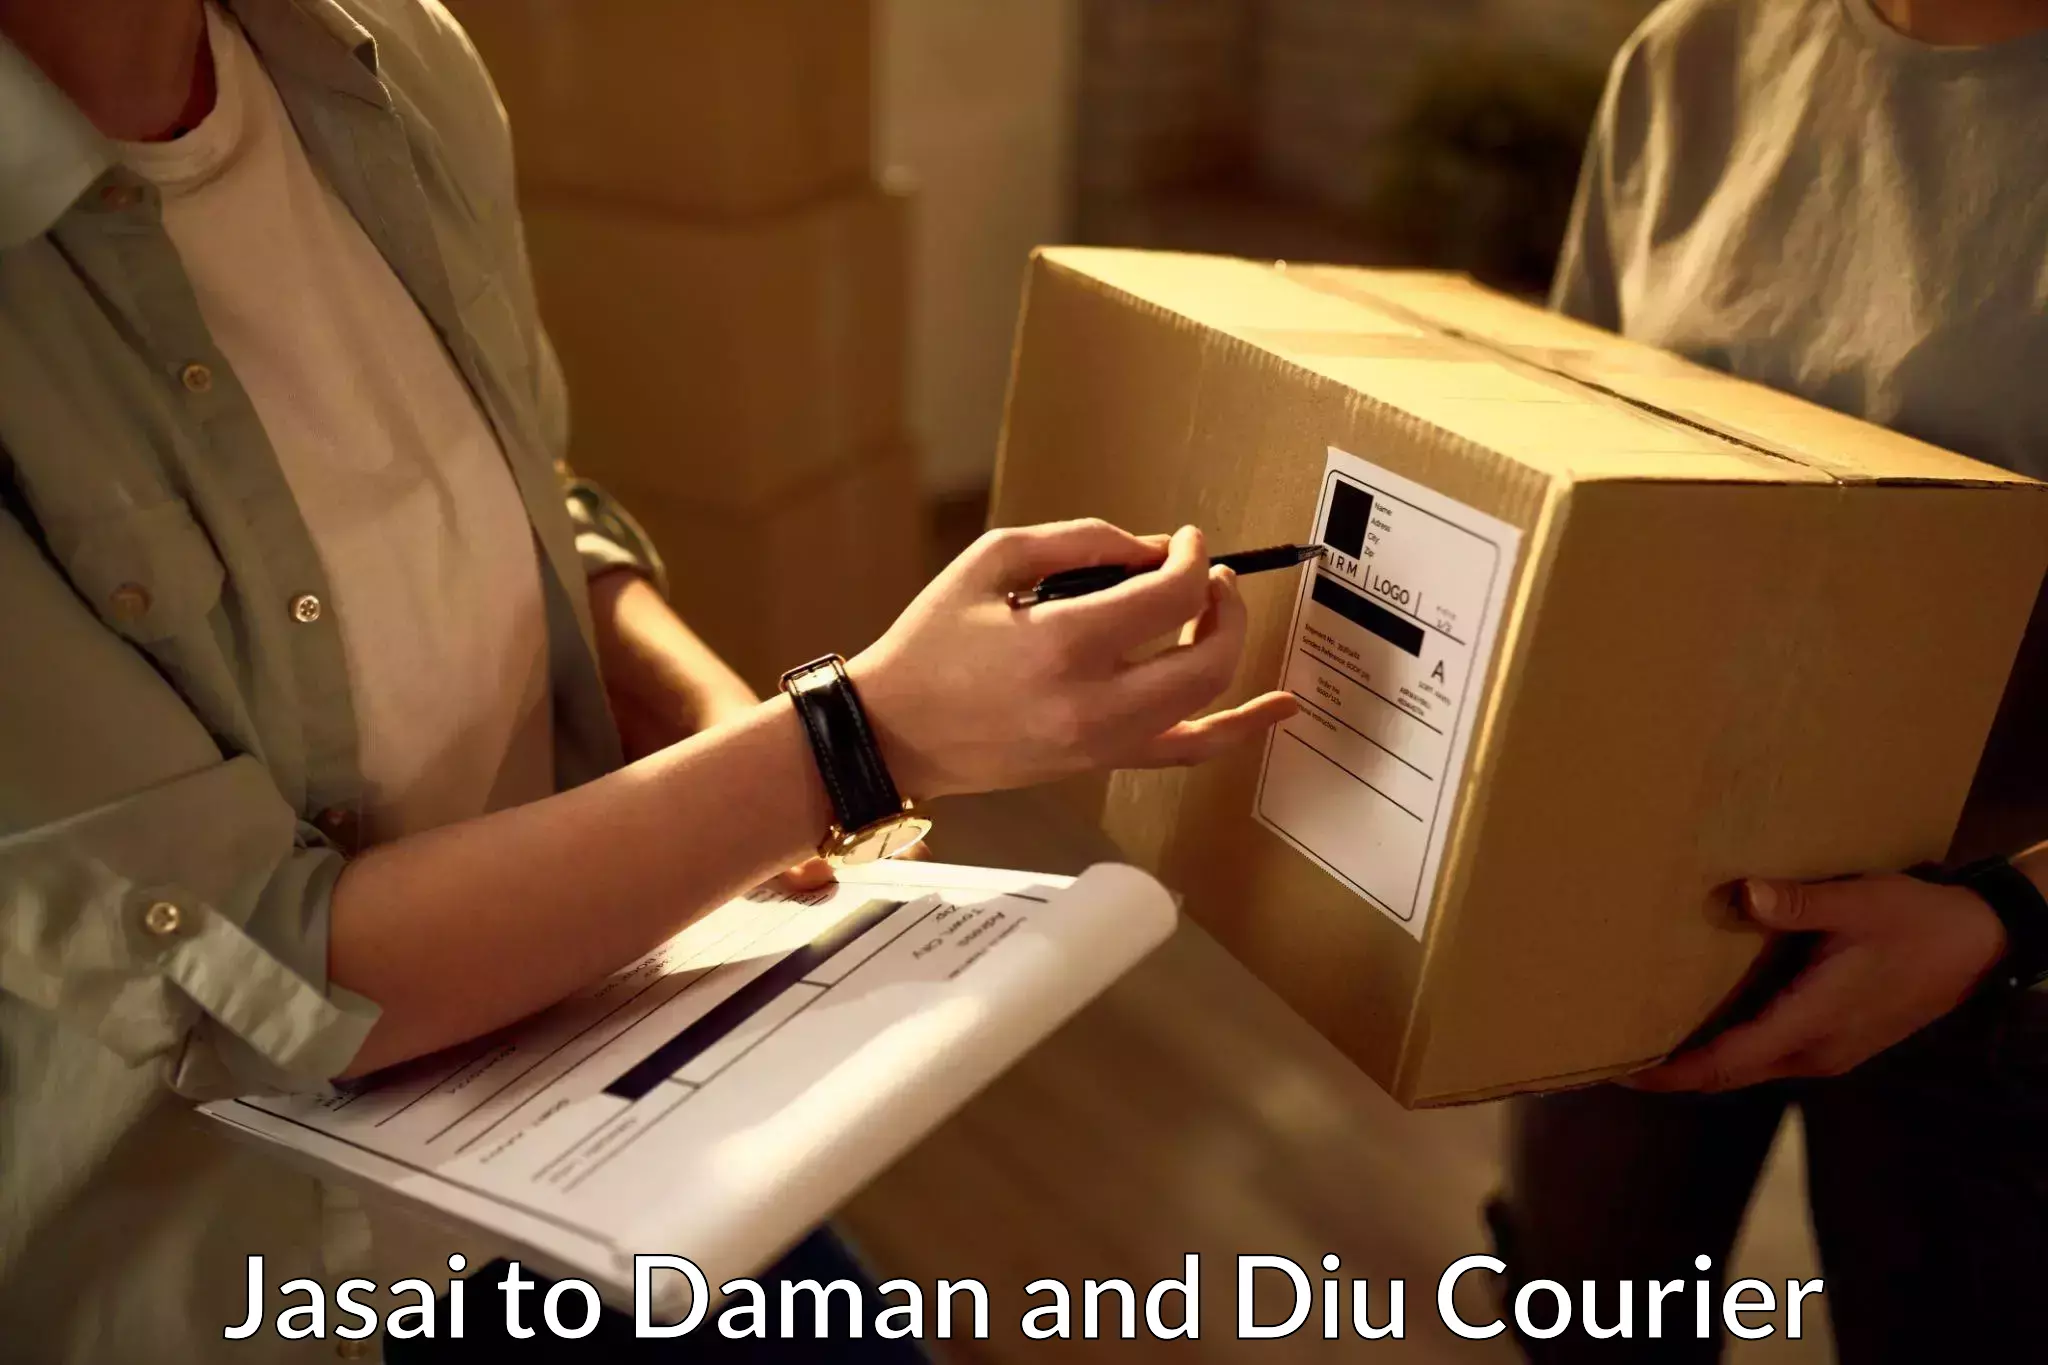 Multi-national courier services Jasai to Daman and Diu